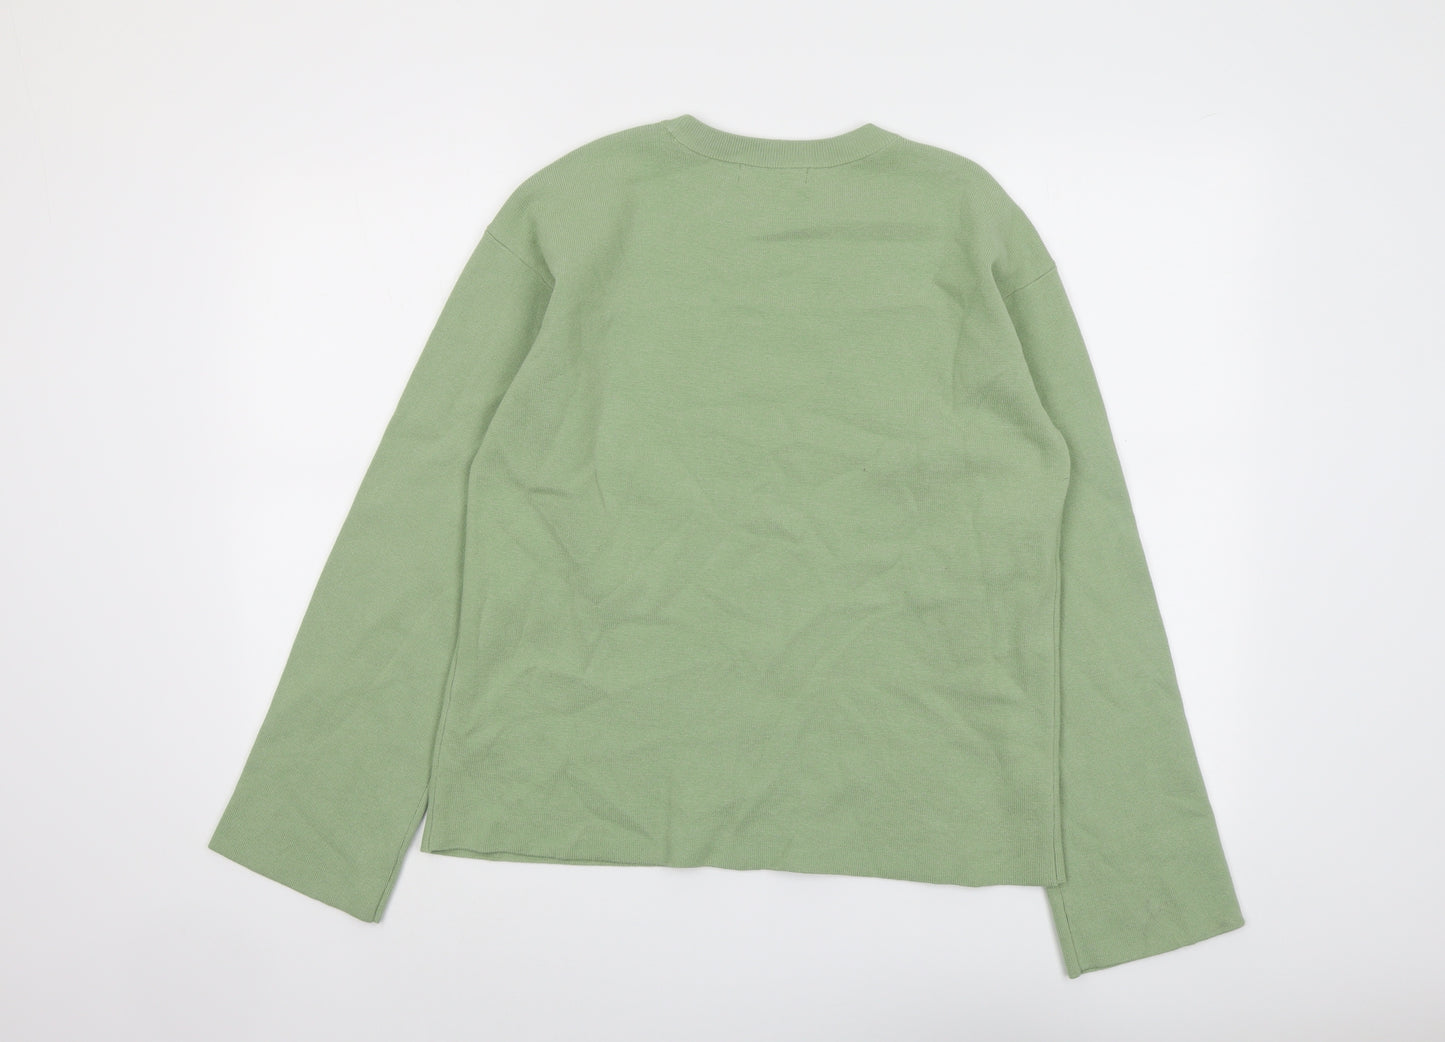 Marks and Spencer Womens Green Round Neck Cotton Pullover Jumper Size M